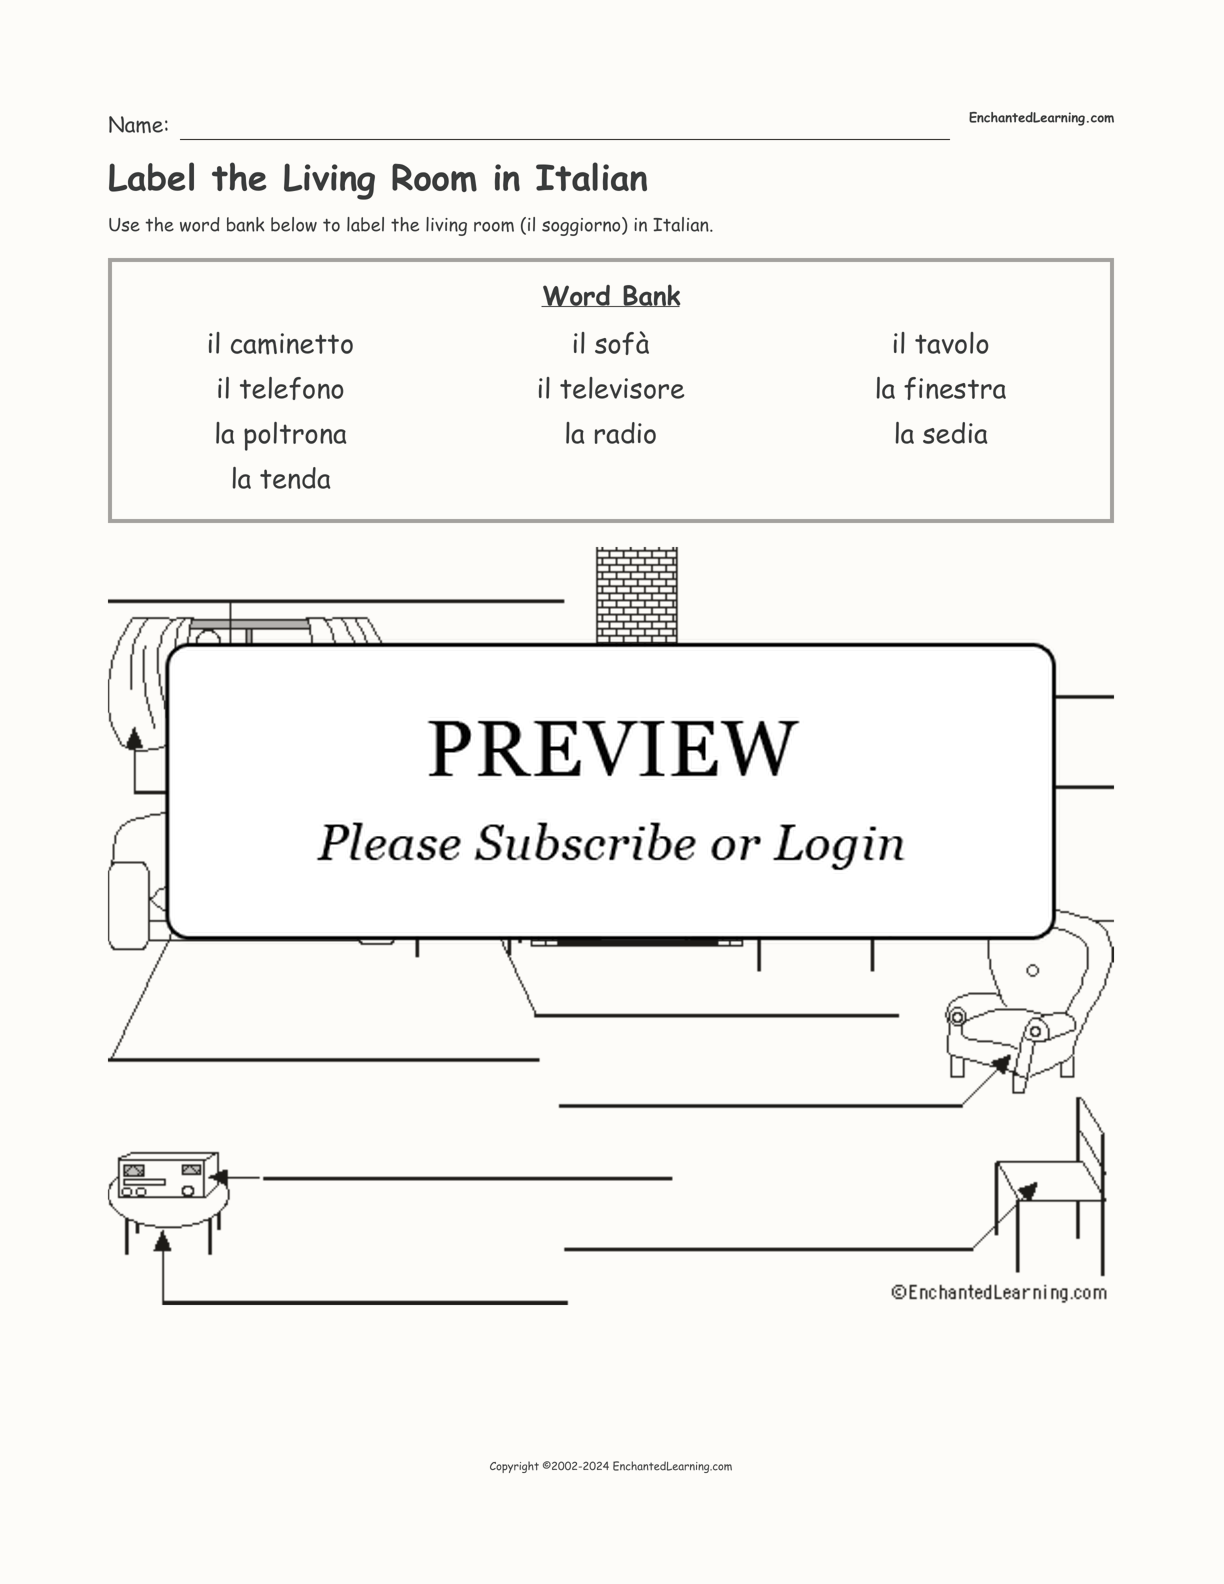 Label the Living Room in Italian interactive worksheet page 1